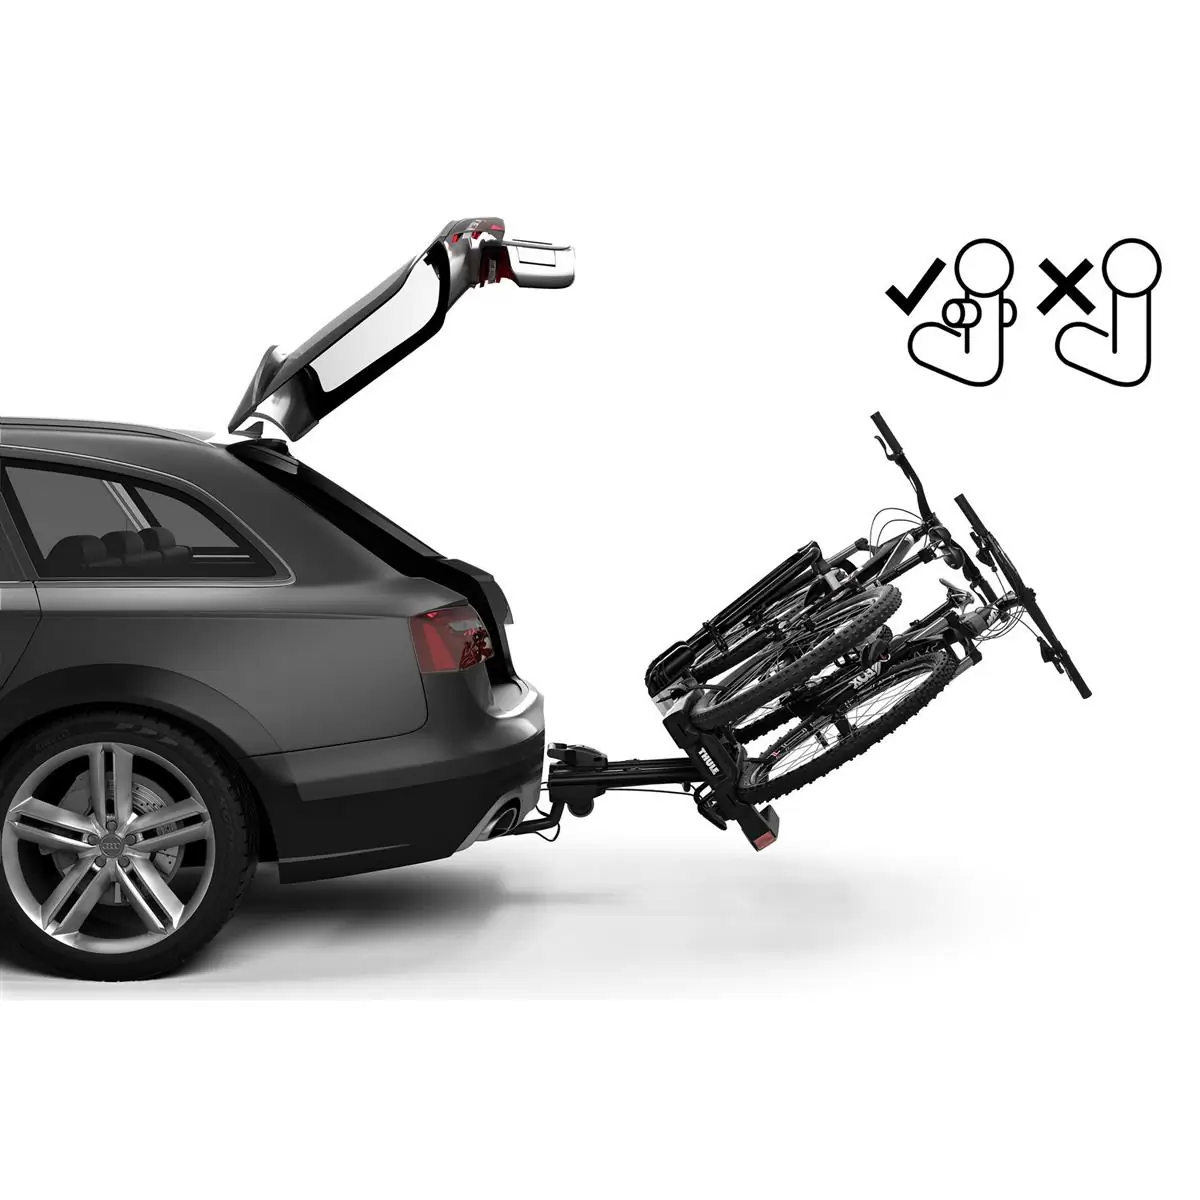 Tow Bar Bike Carrier EasyFold XT 965 Fix4Bike for Two Bikes only compatible with Fix4Bike #1